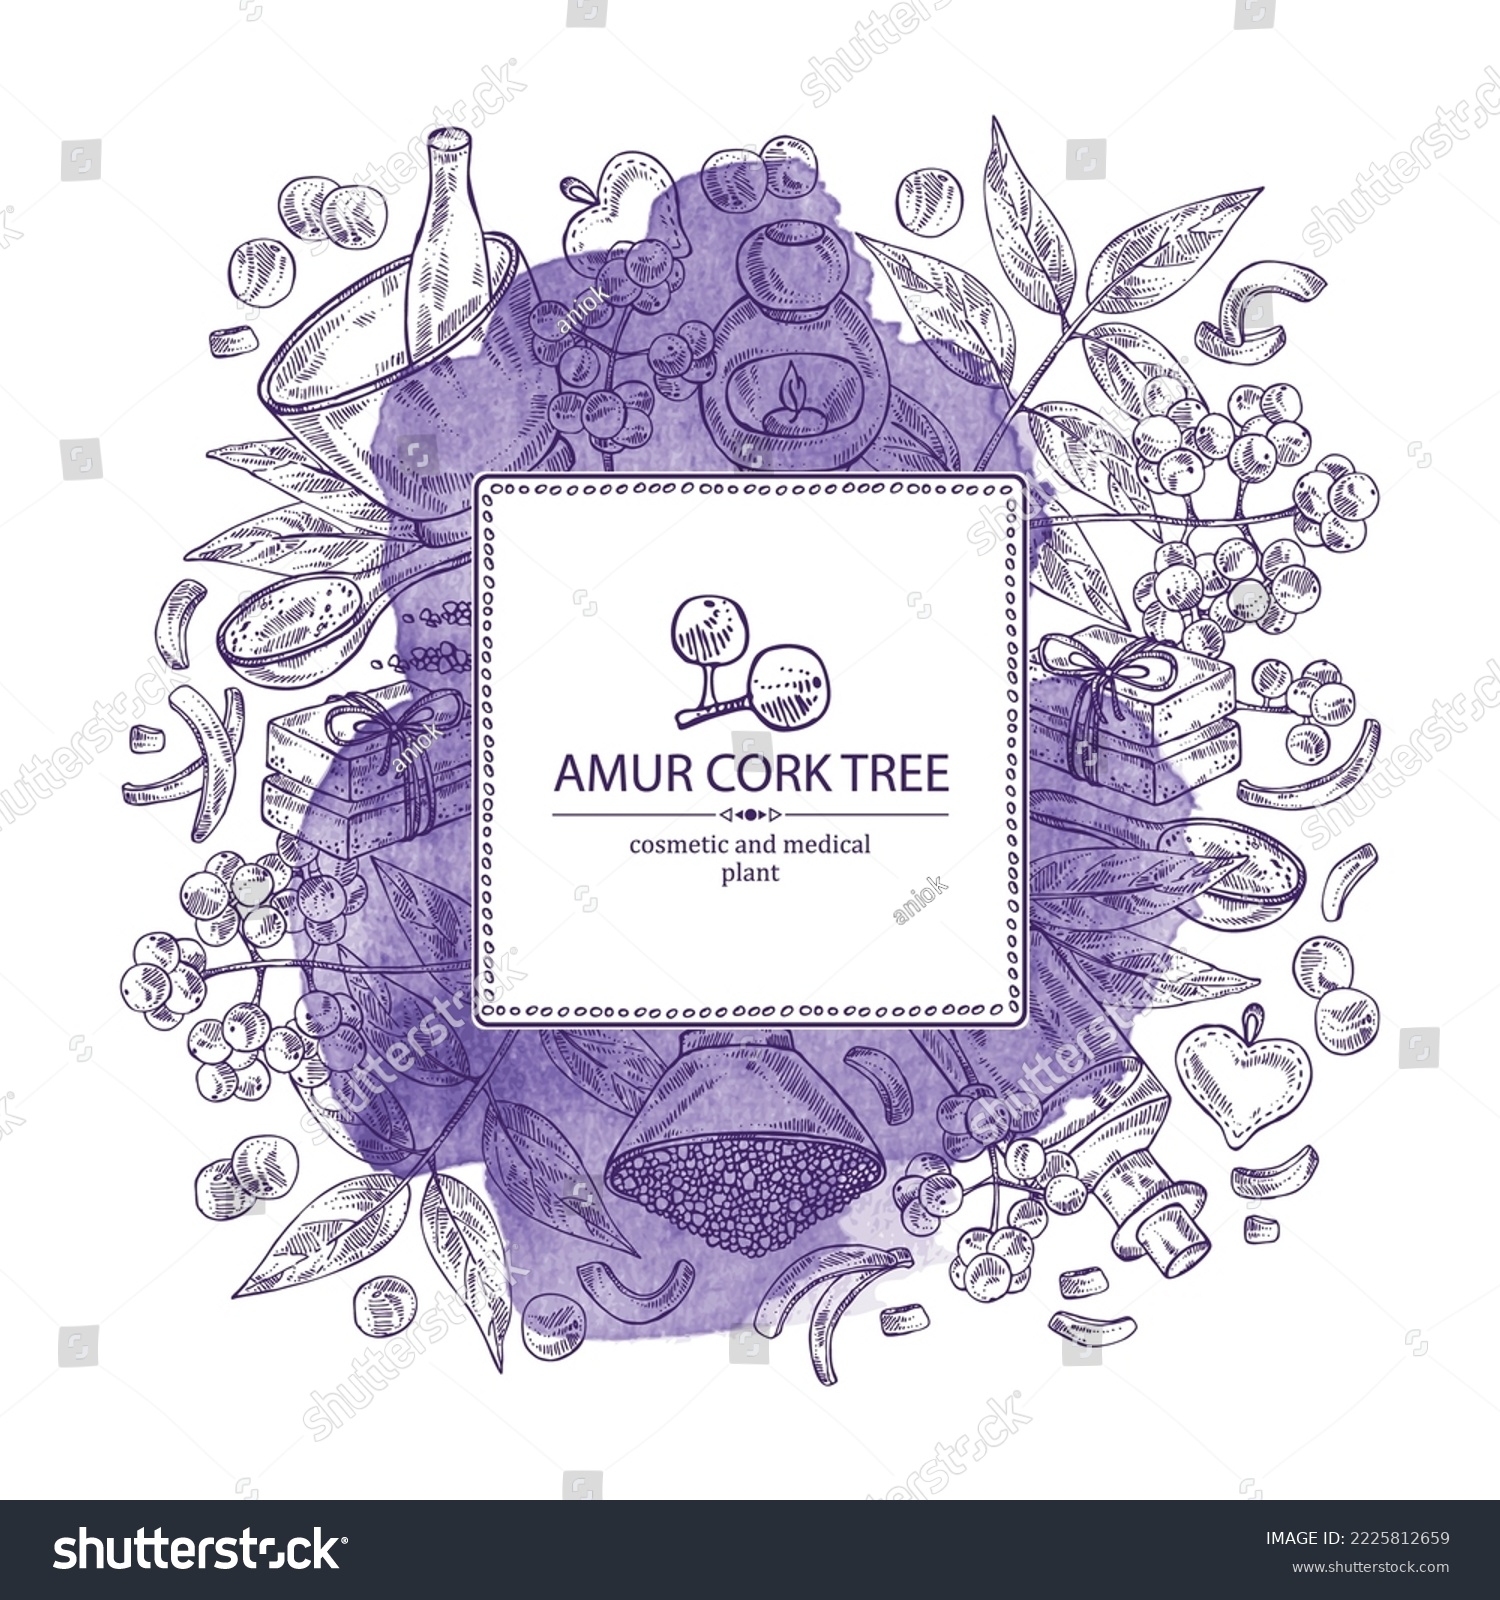 SVG of Watercolor background with  amur cork tree: amur cork berries, plant and amur cork tree bark. Phellodendron amurense. Oil, soap and bath salt . Cosmetics and medical plant. Vector hand drawn illustrat svg